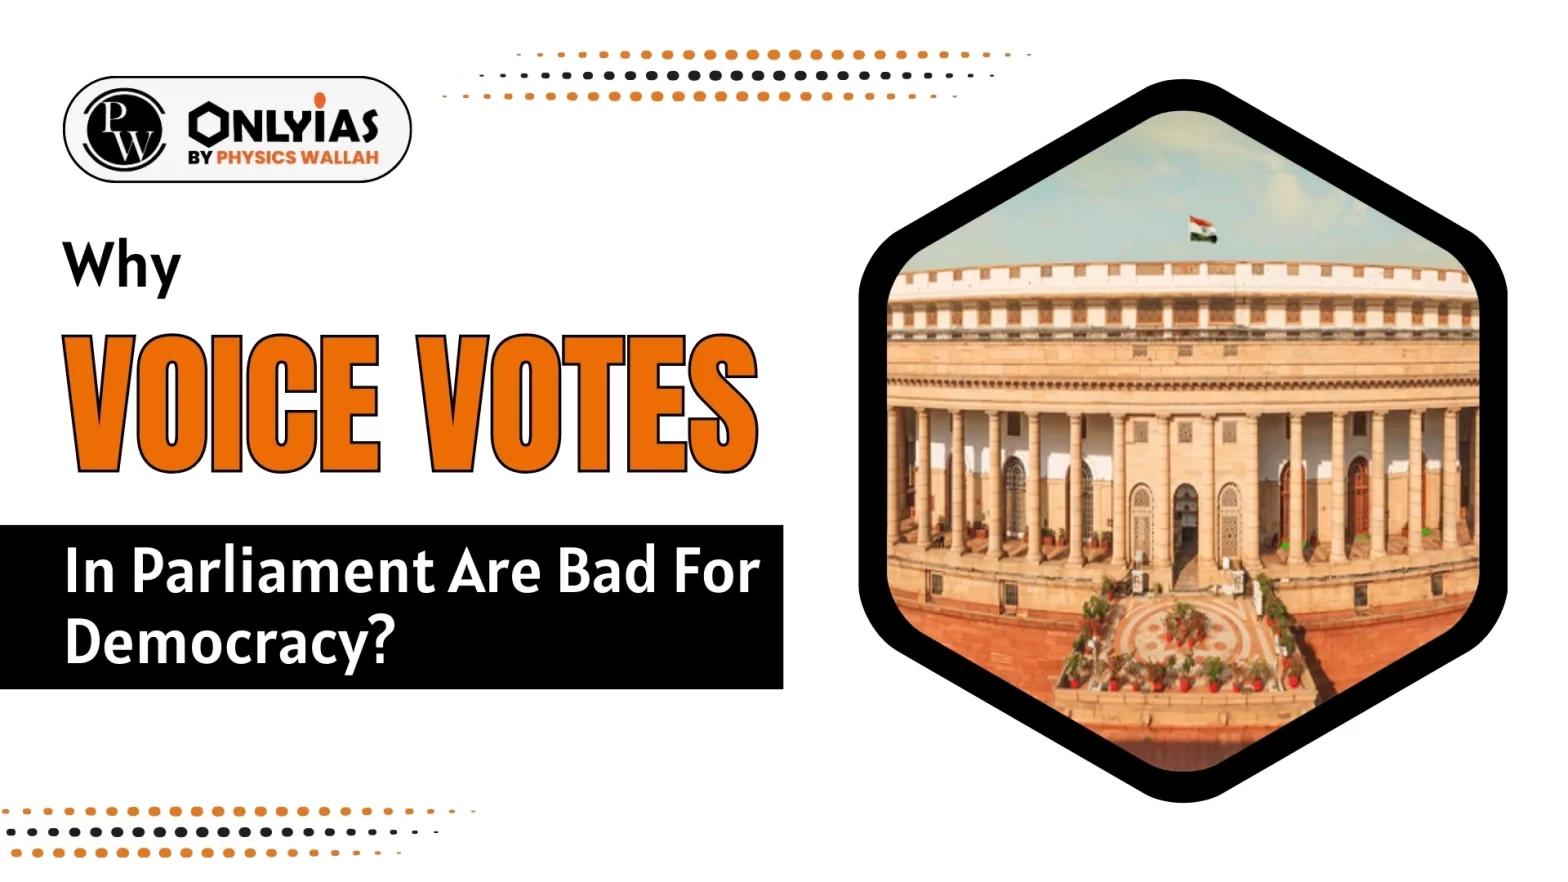 Why Voice Votes In Parliament Are Bad For Democracy?